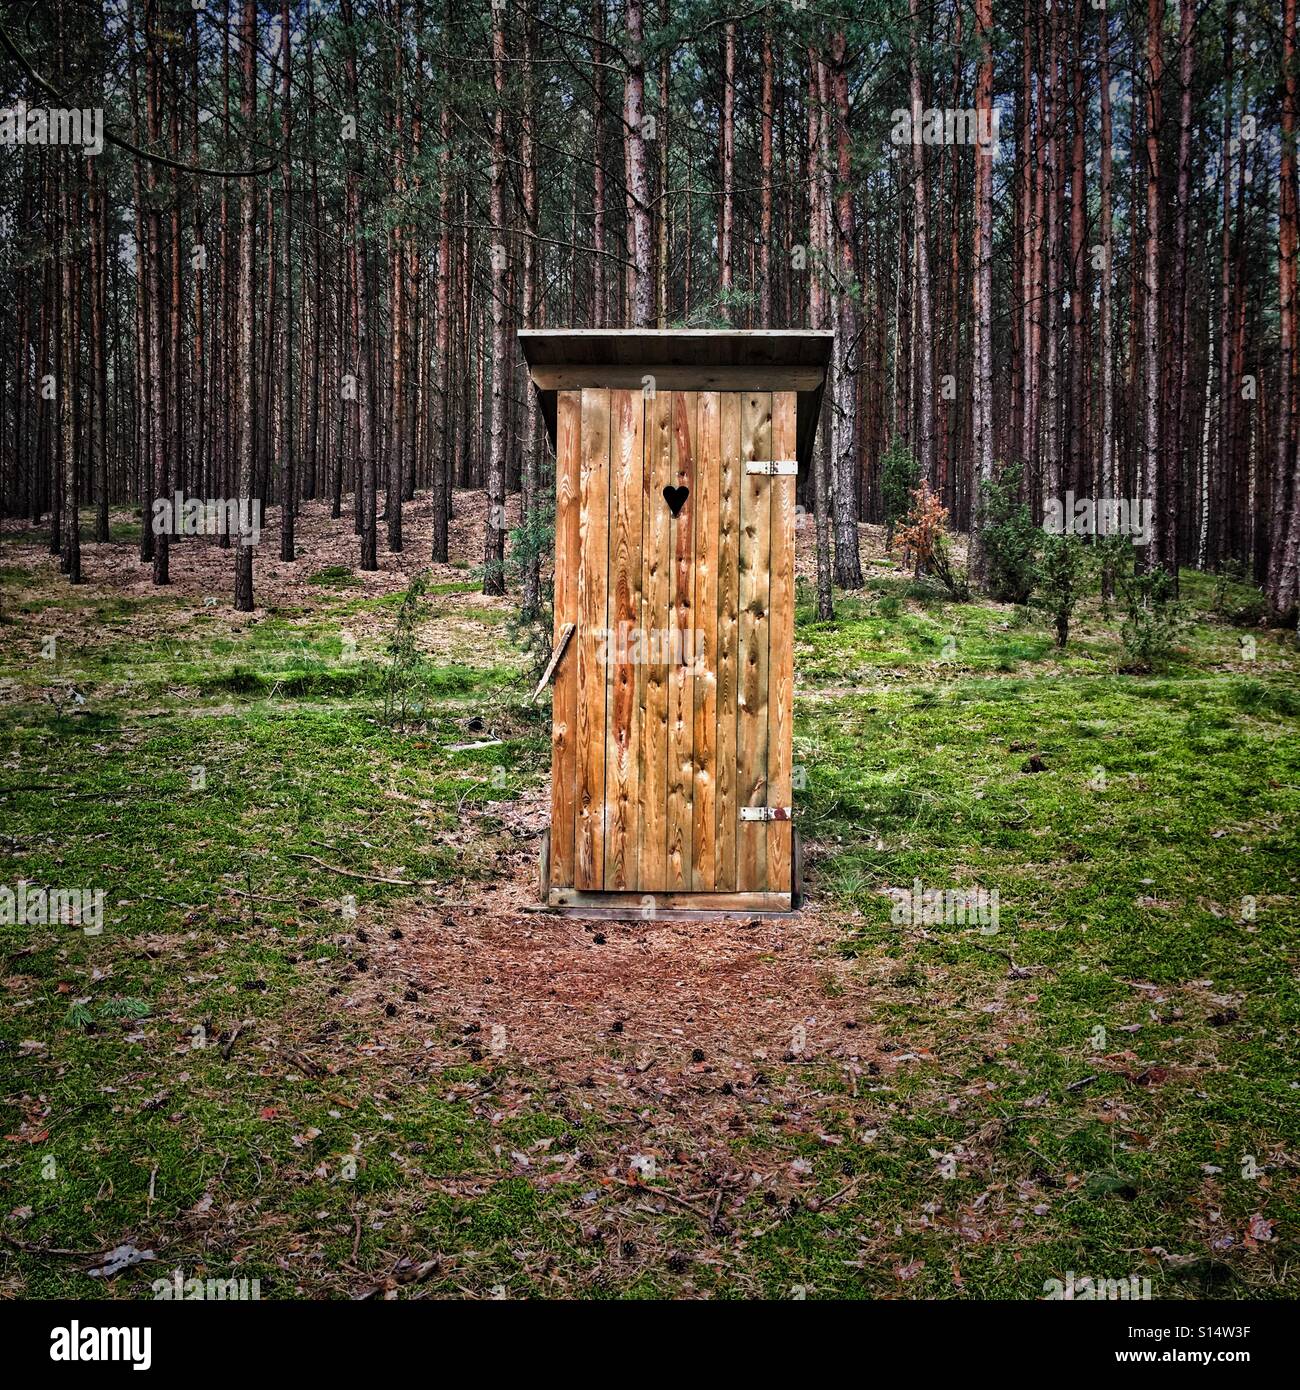 Wooden privy in forest Stock Photo